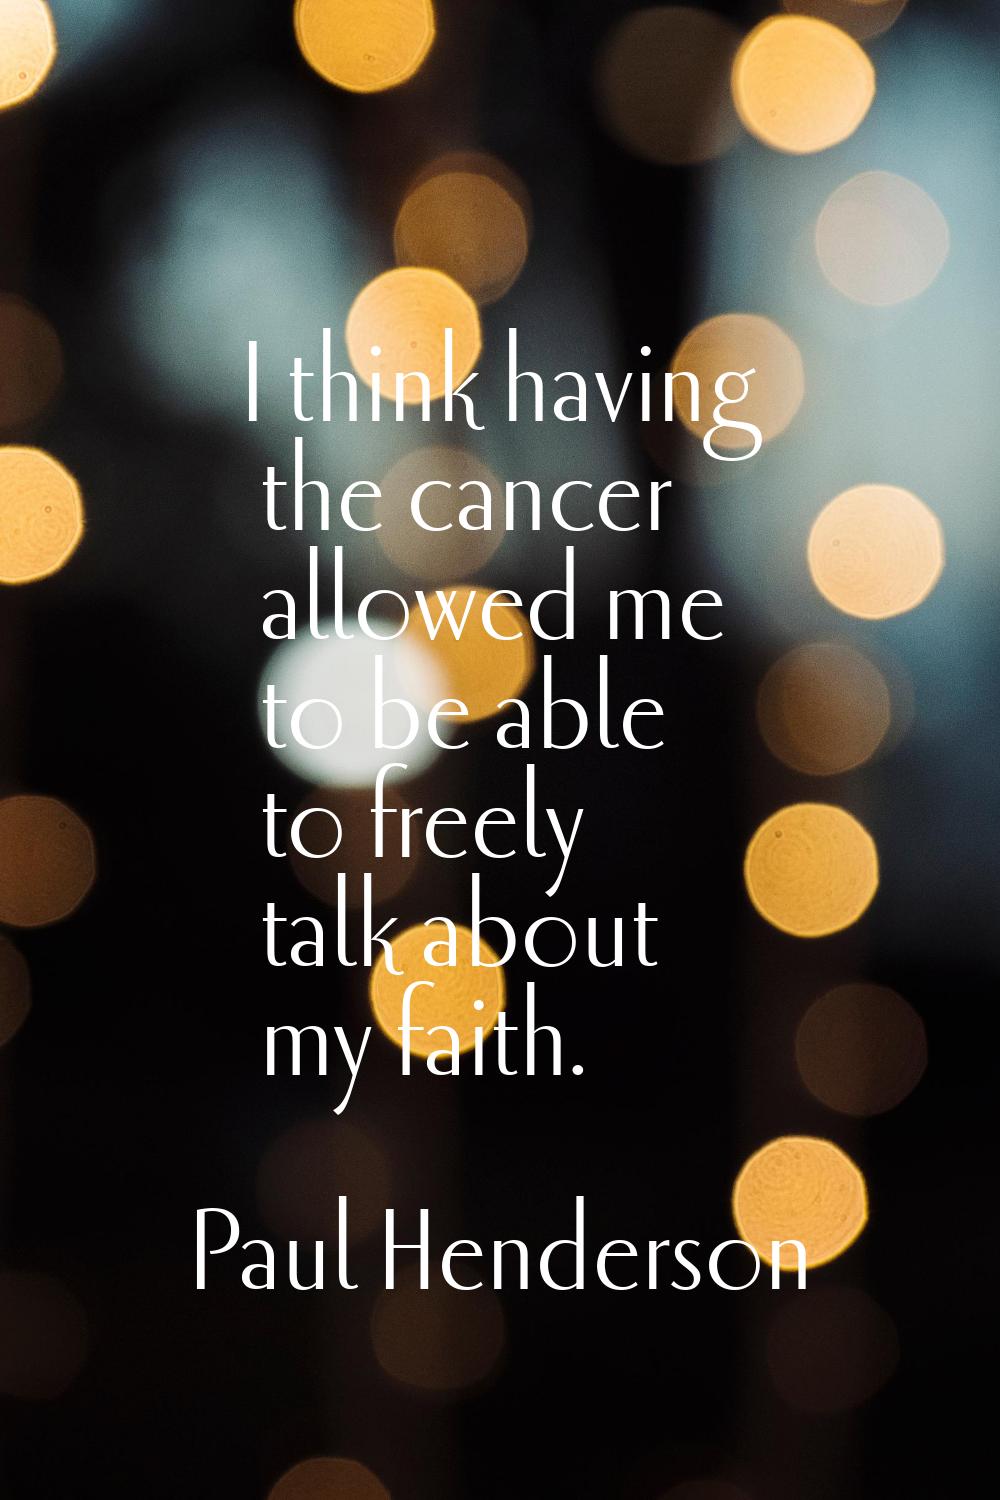 I think having the cancer allowed me to be able to freely talk about my faith.